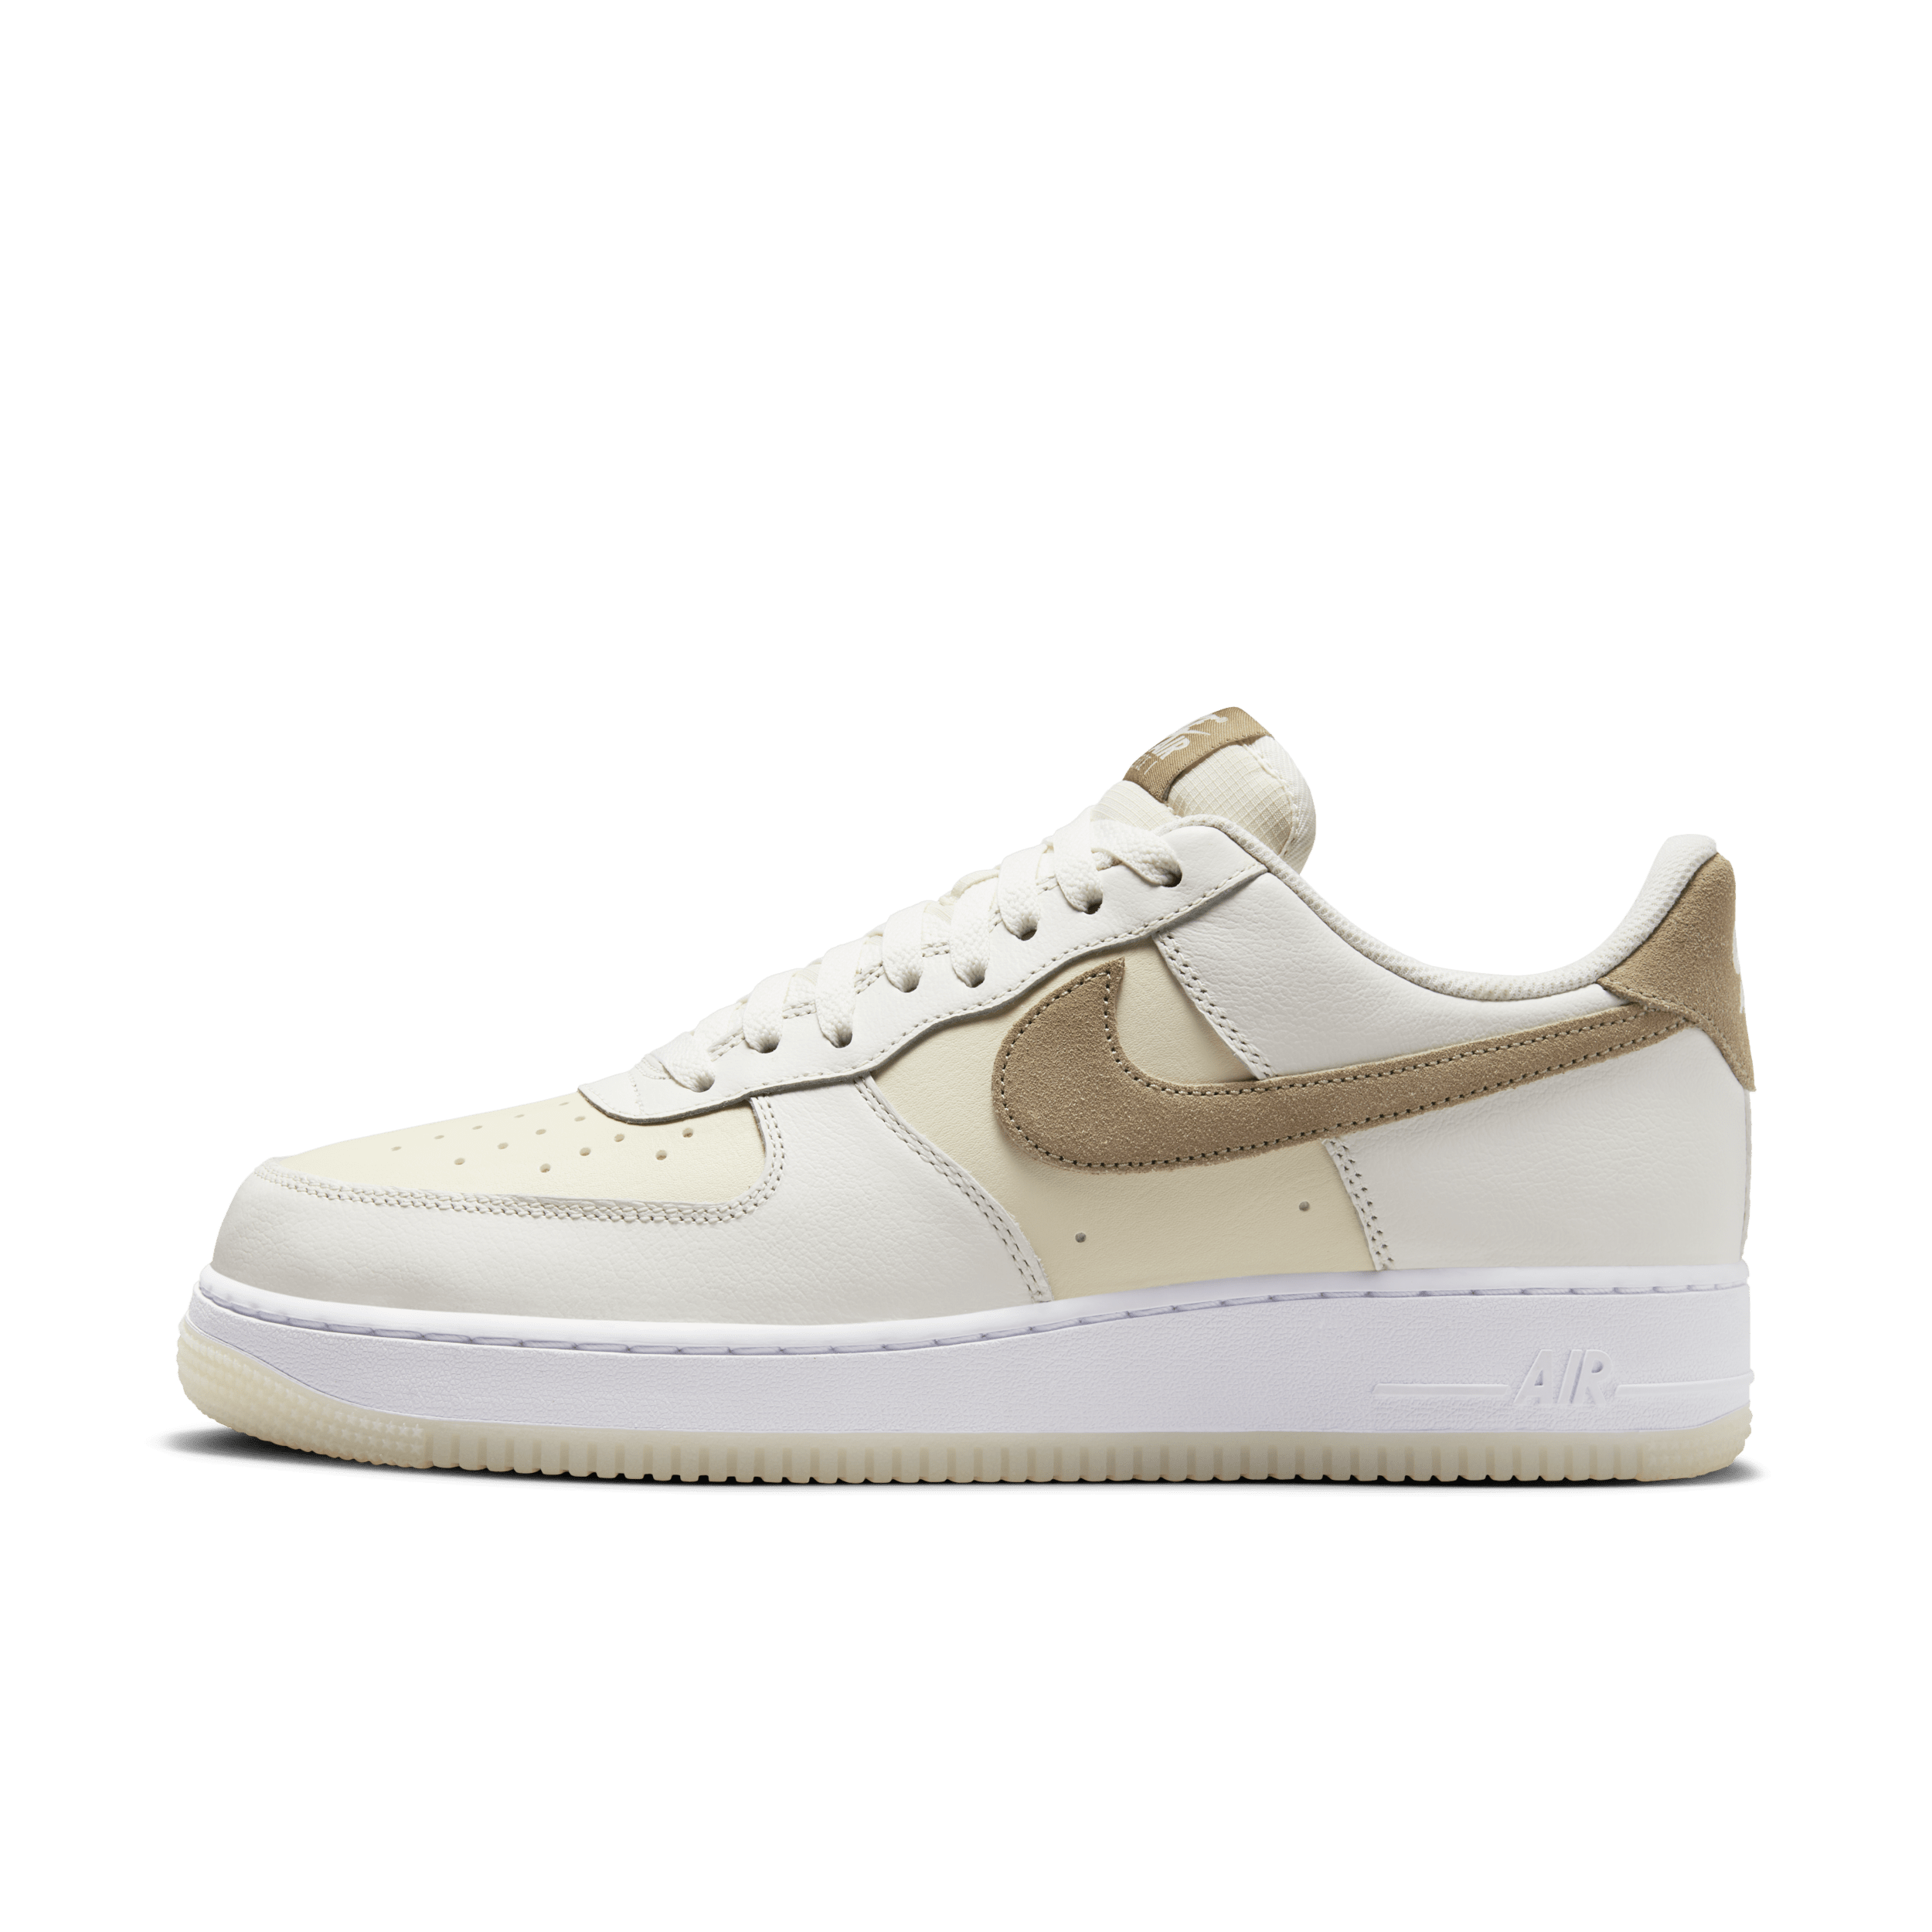 Nike Air Force 1 '07 LV8 herenschoenen - Wit